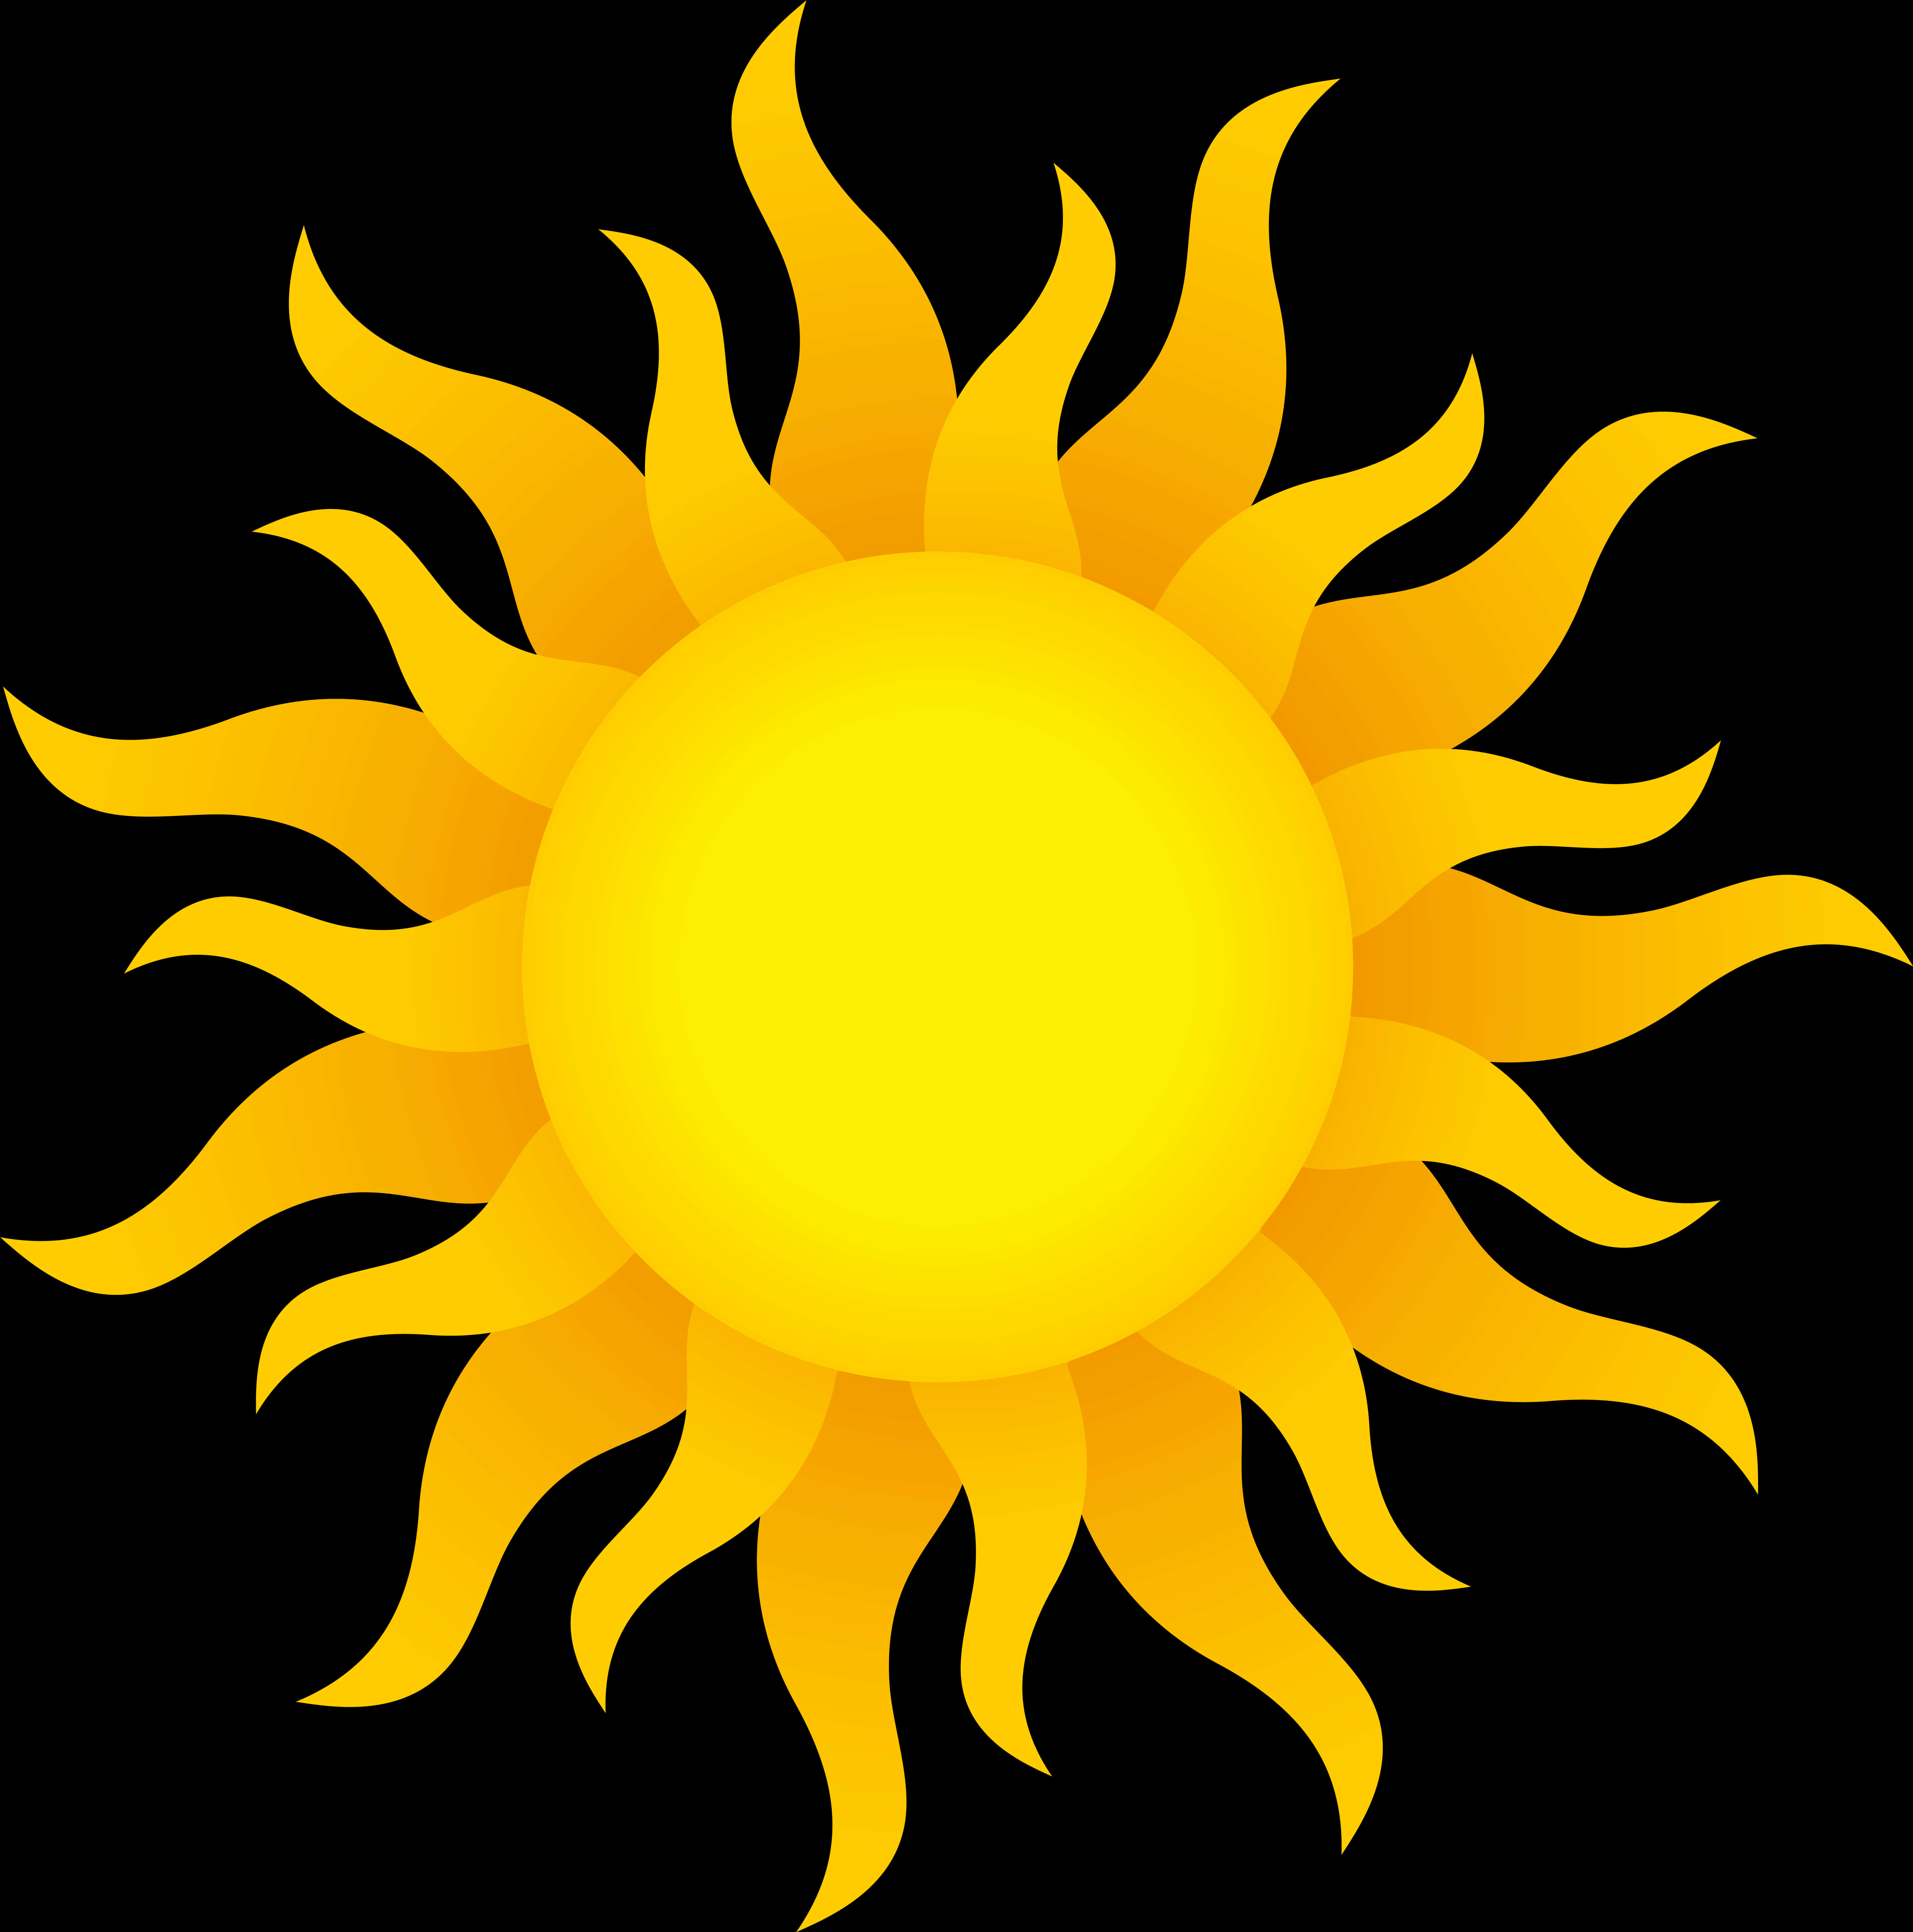 Bright Yellow Sun Graphic Transparent Background PNG